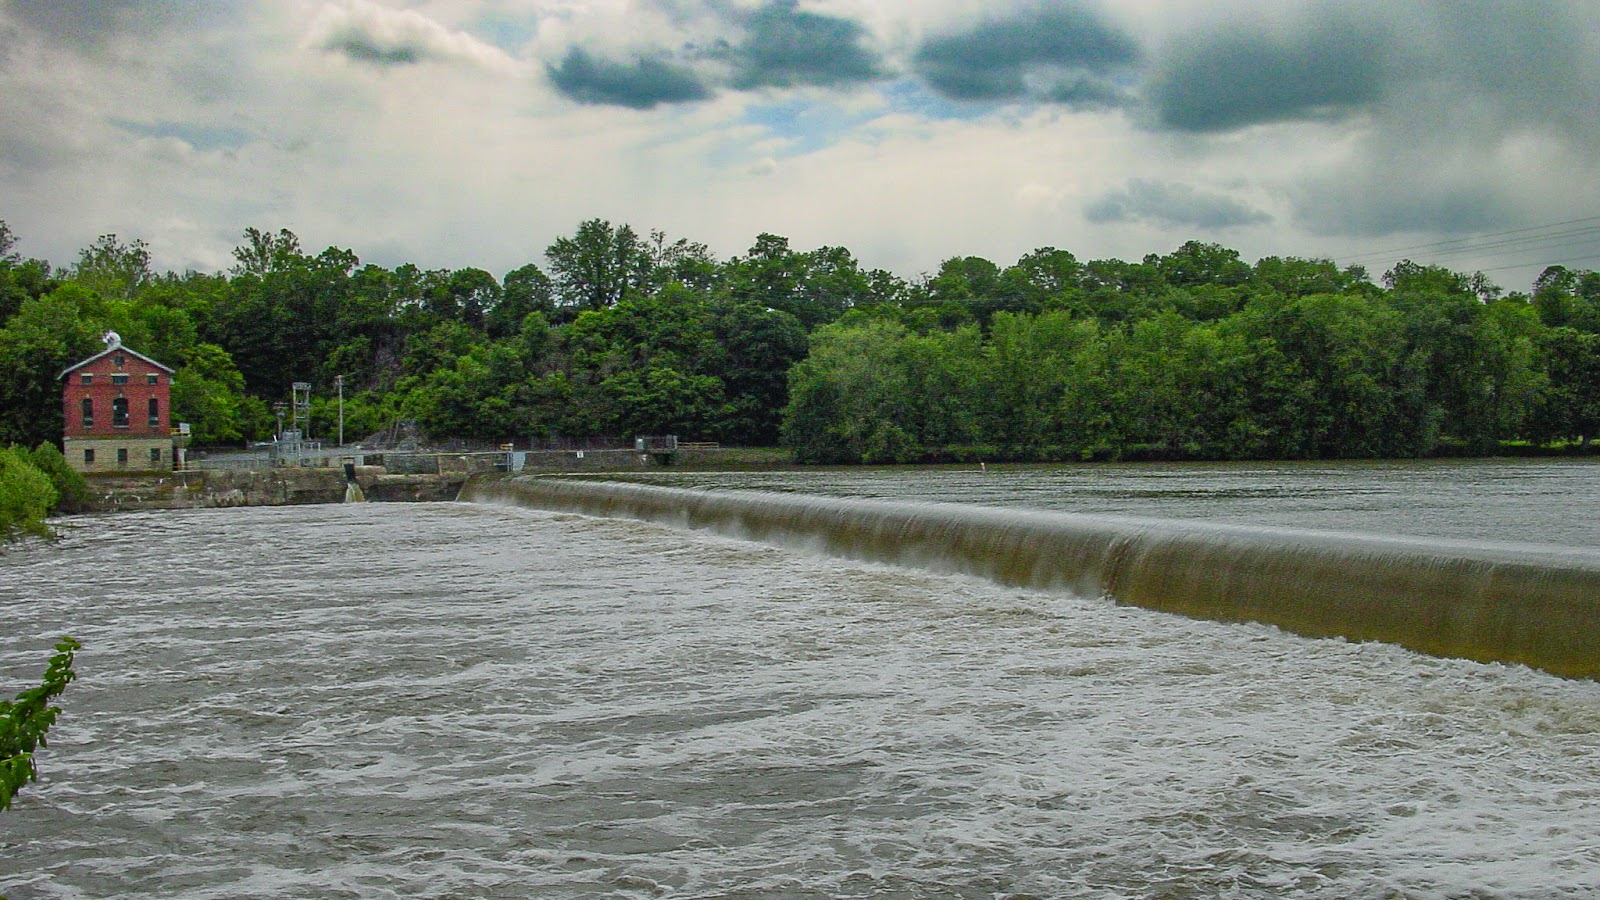 A river flows over a weir with a 2 story building on the far shore. 